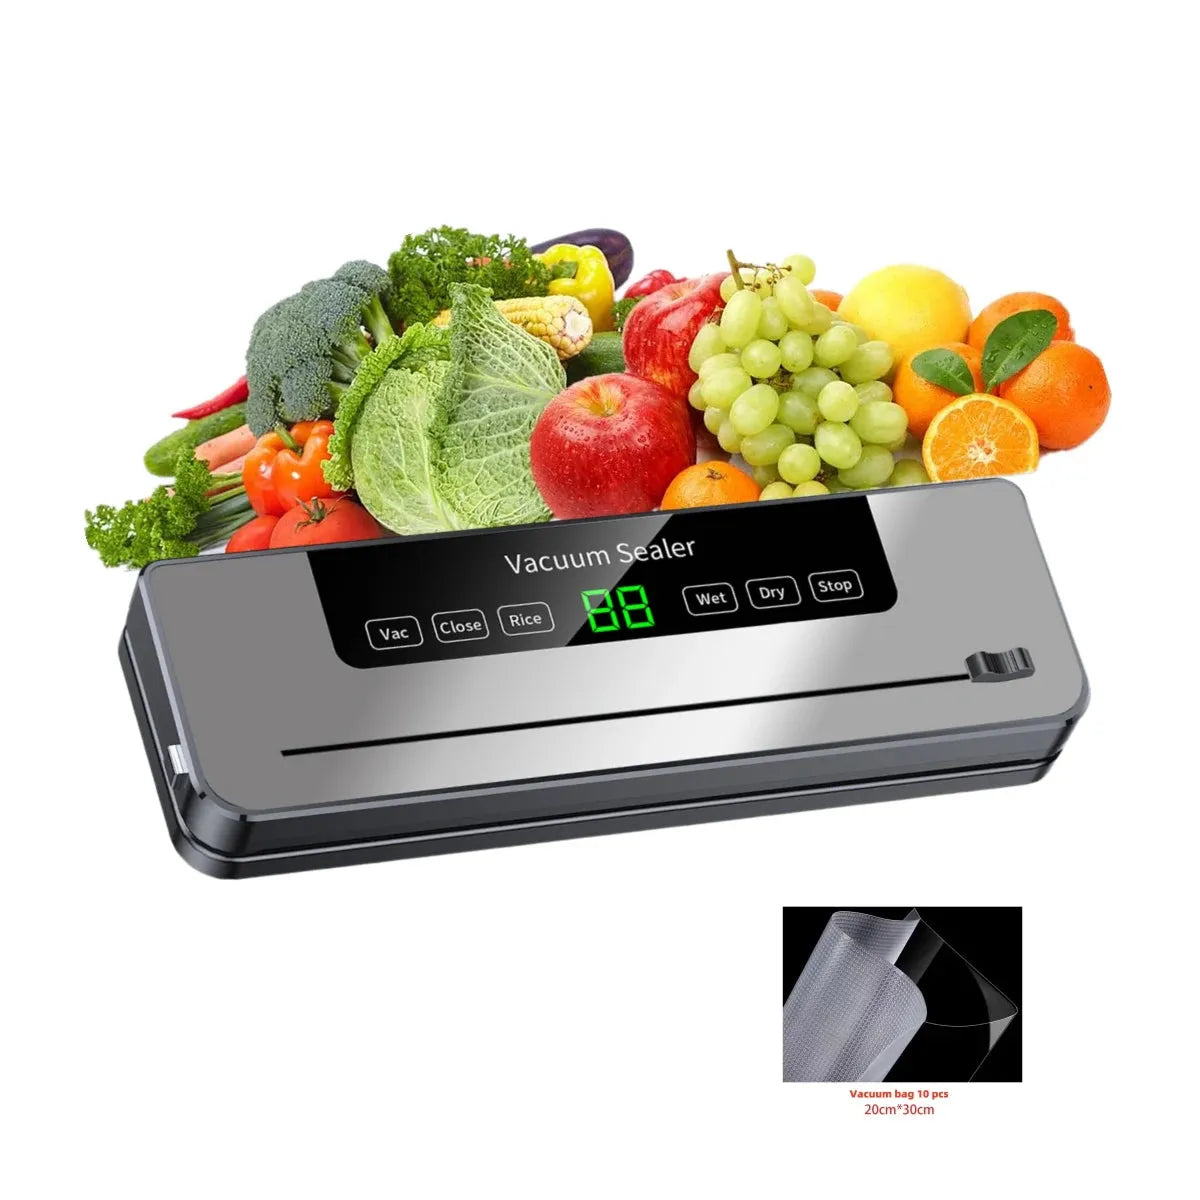 Vacuum Sealer Machine Dry/Wet Food Vacuum Sealer With UV Sterilization For Food Storage And Sous Vide Cooking Built-in Cutter